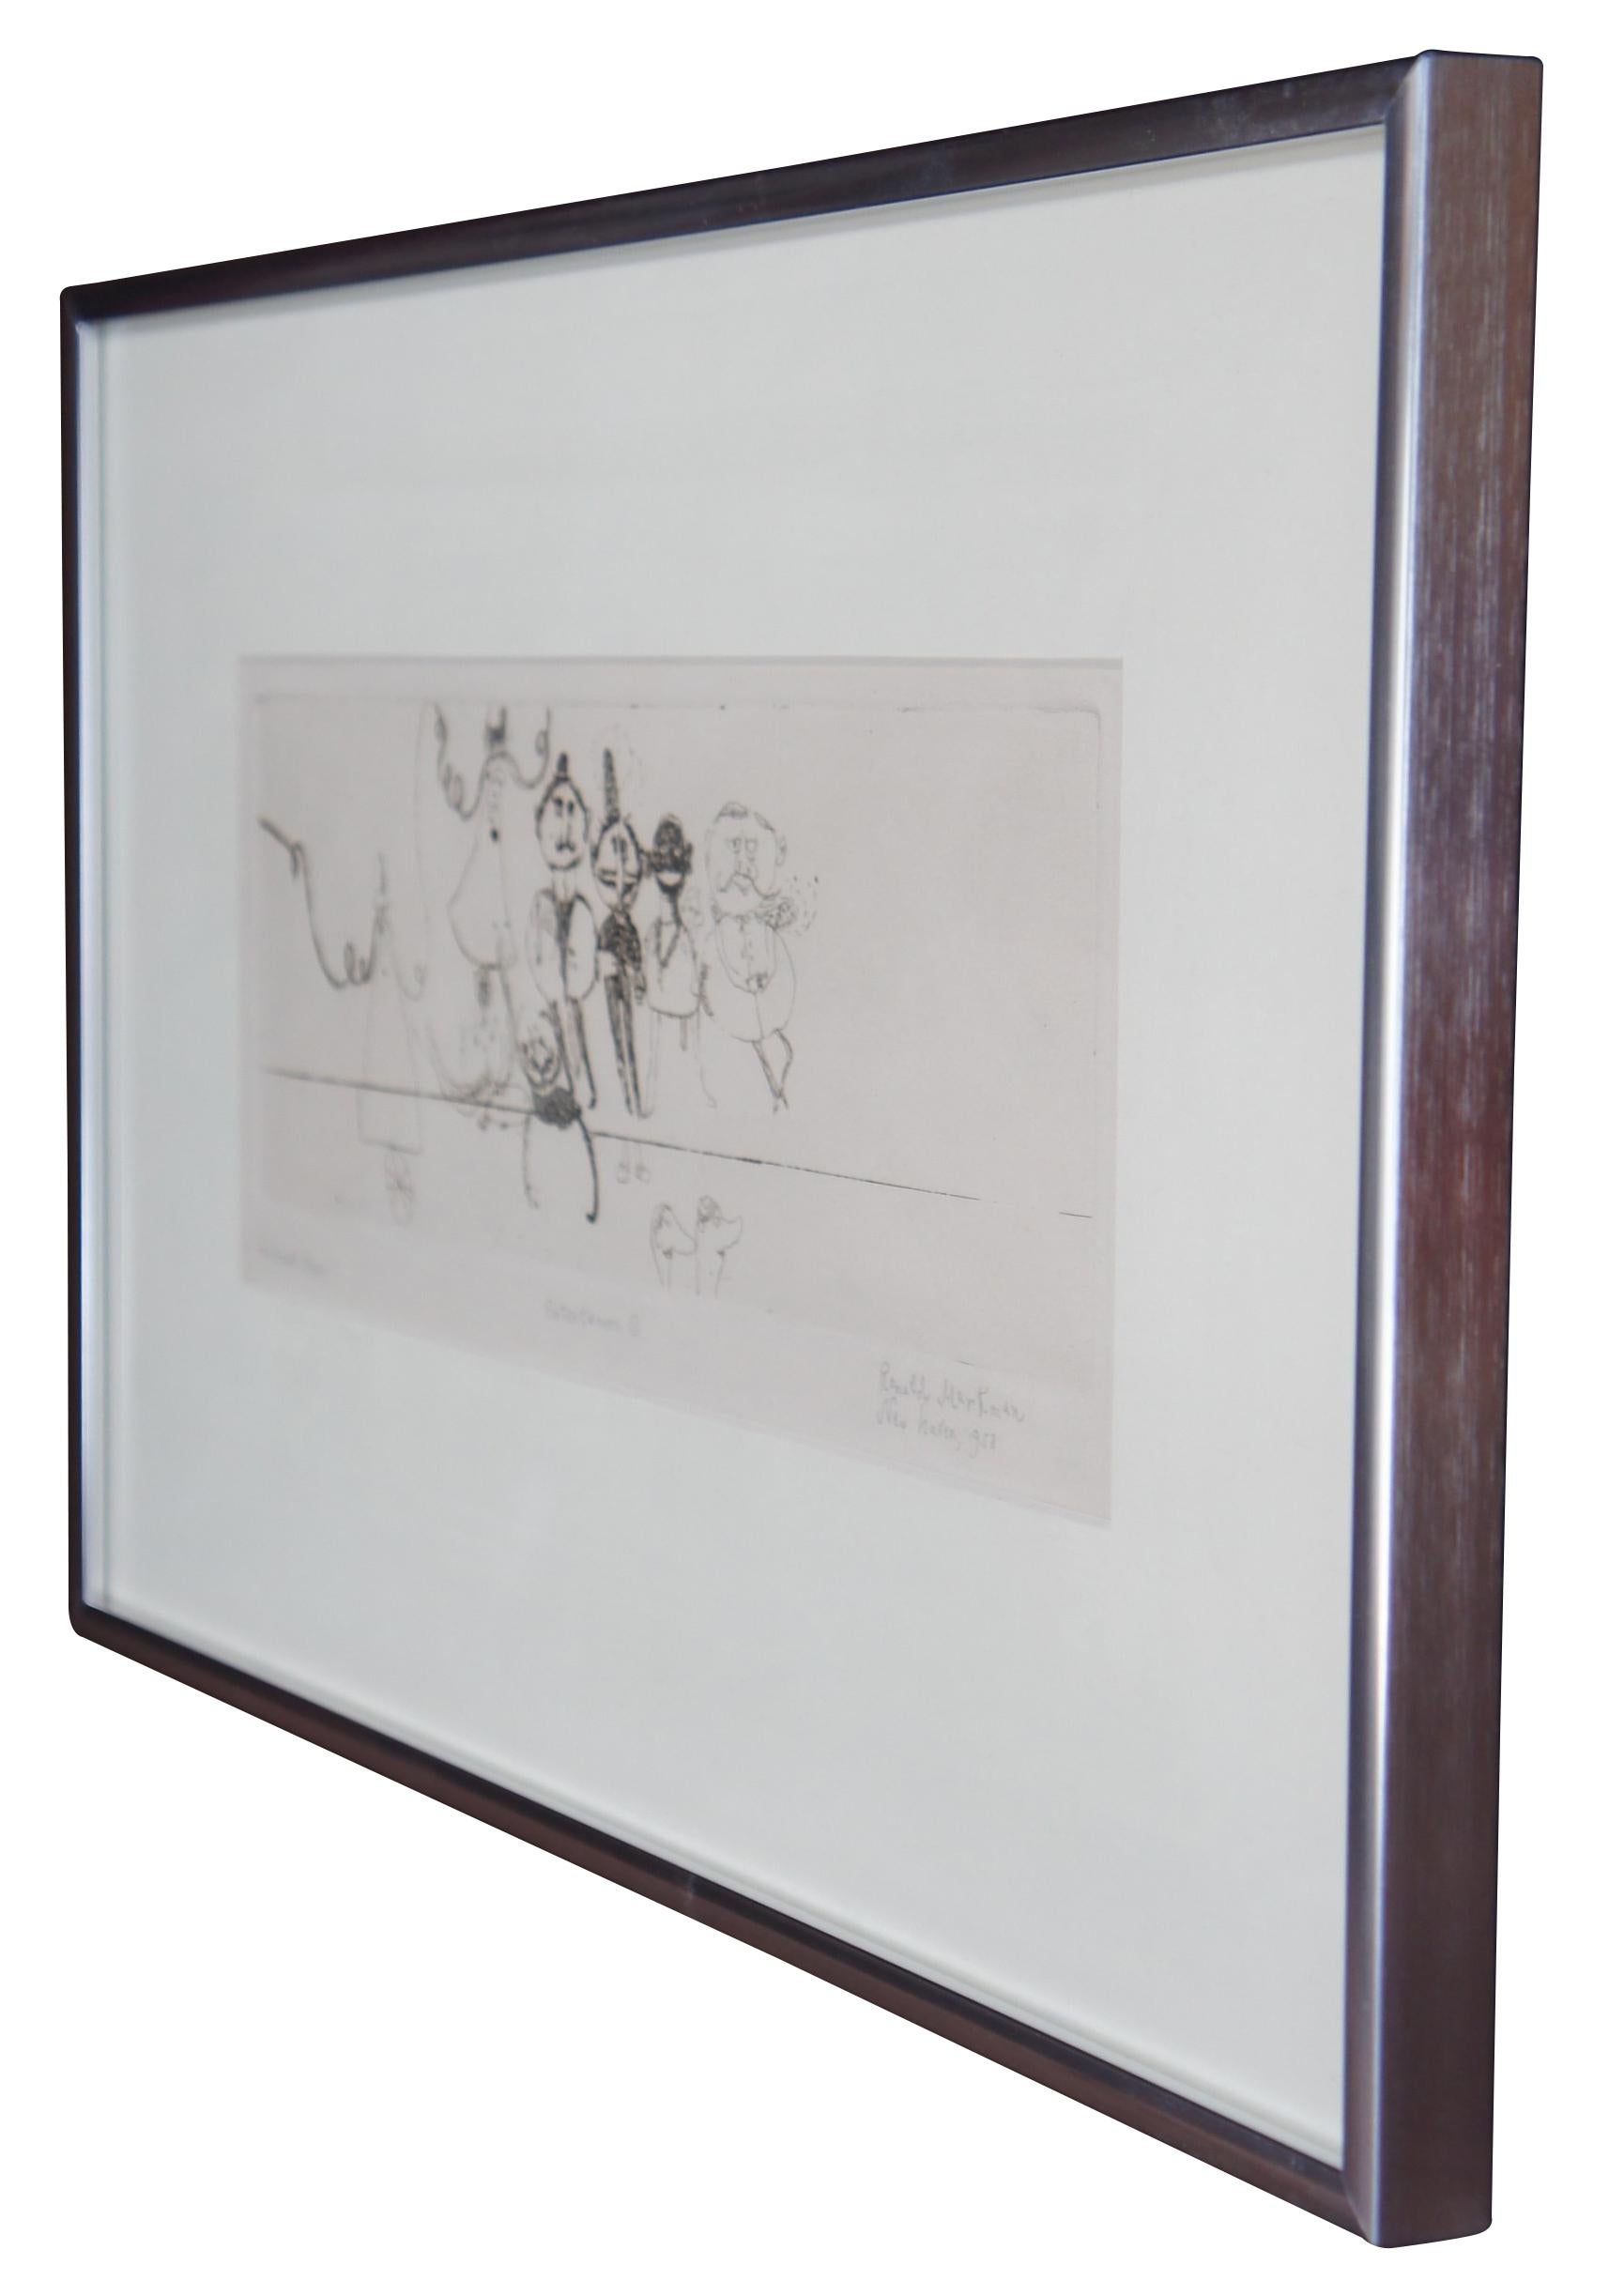 Midcentury etching by Ronald Markman, made exclusively for Ernest Boyer of Dayton Ohio. Edition 1/1. Features a circus of characters and abstract figures, cats, men, and mustaches

Biography
Ronald Markman (May 29, 1931 – May 30, 2017) was an